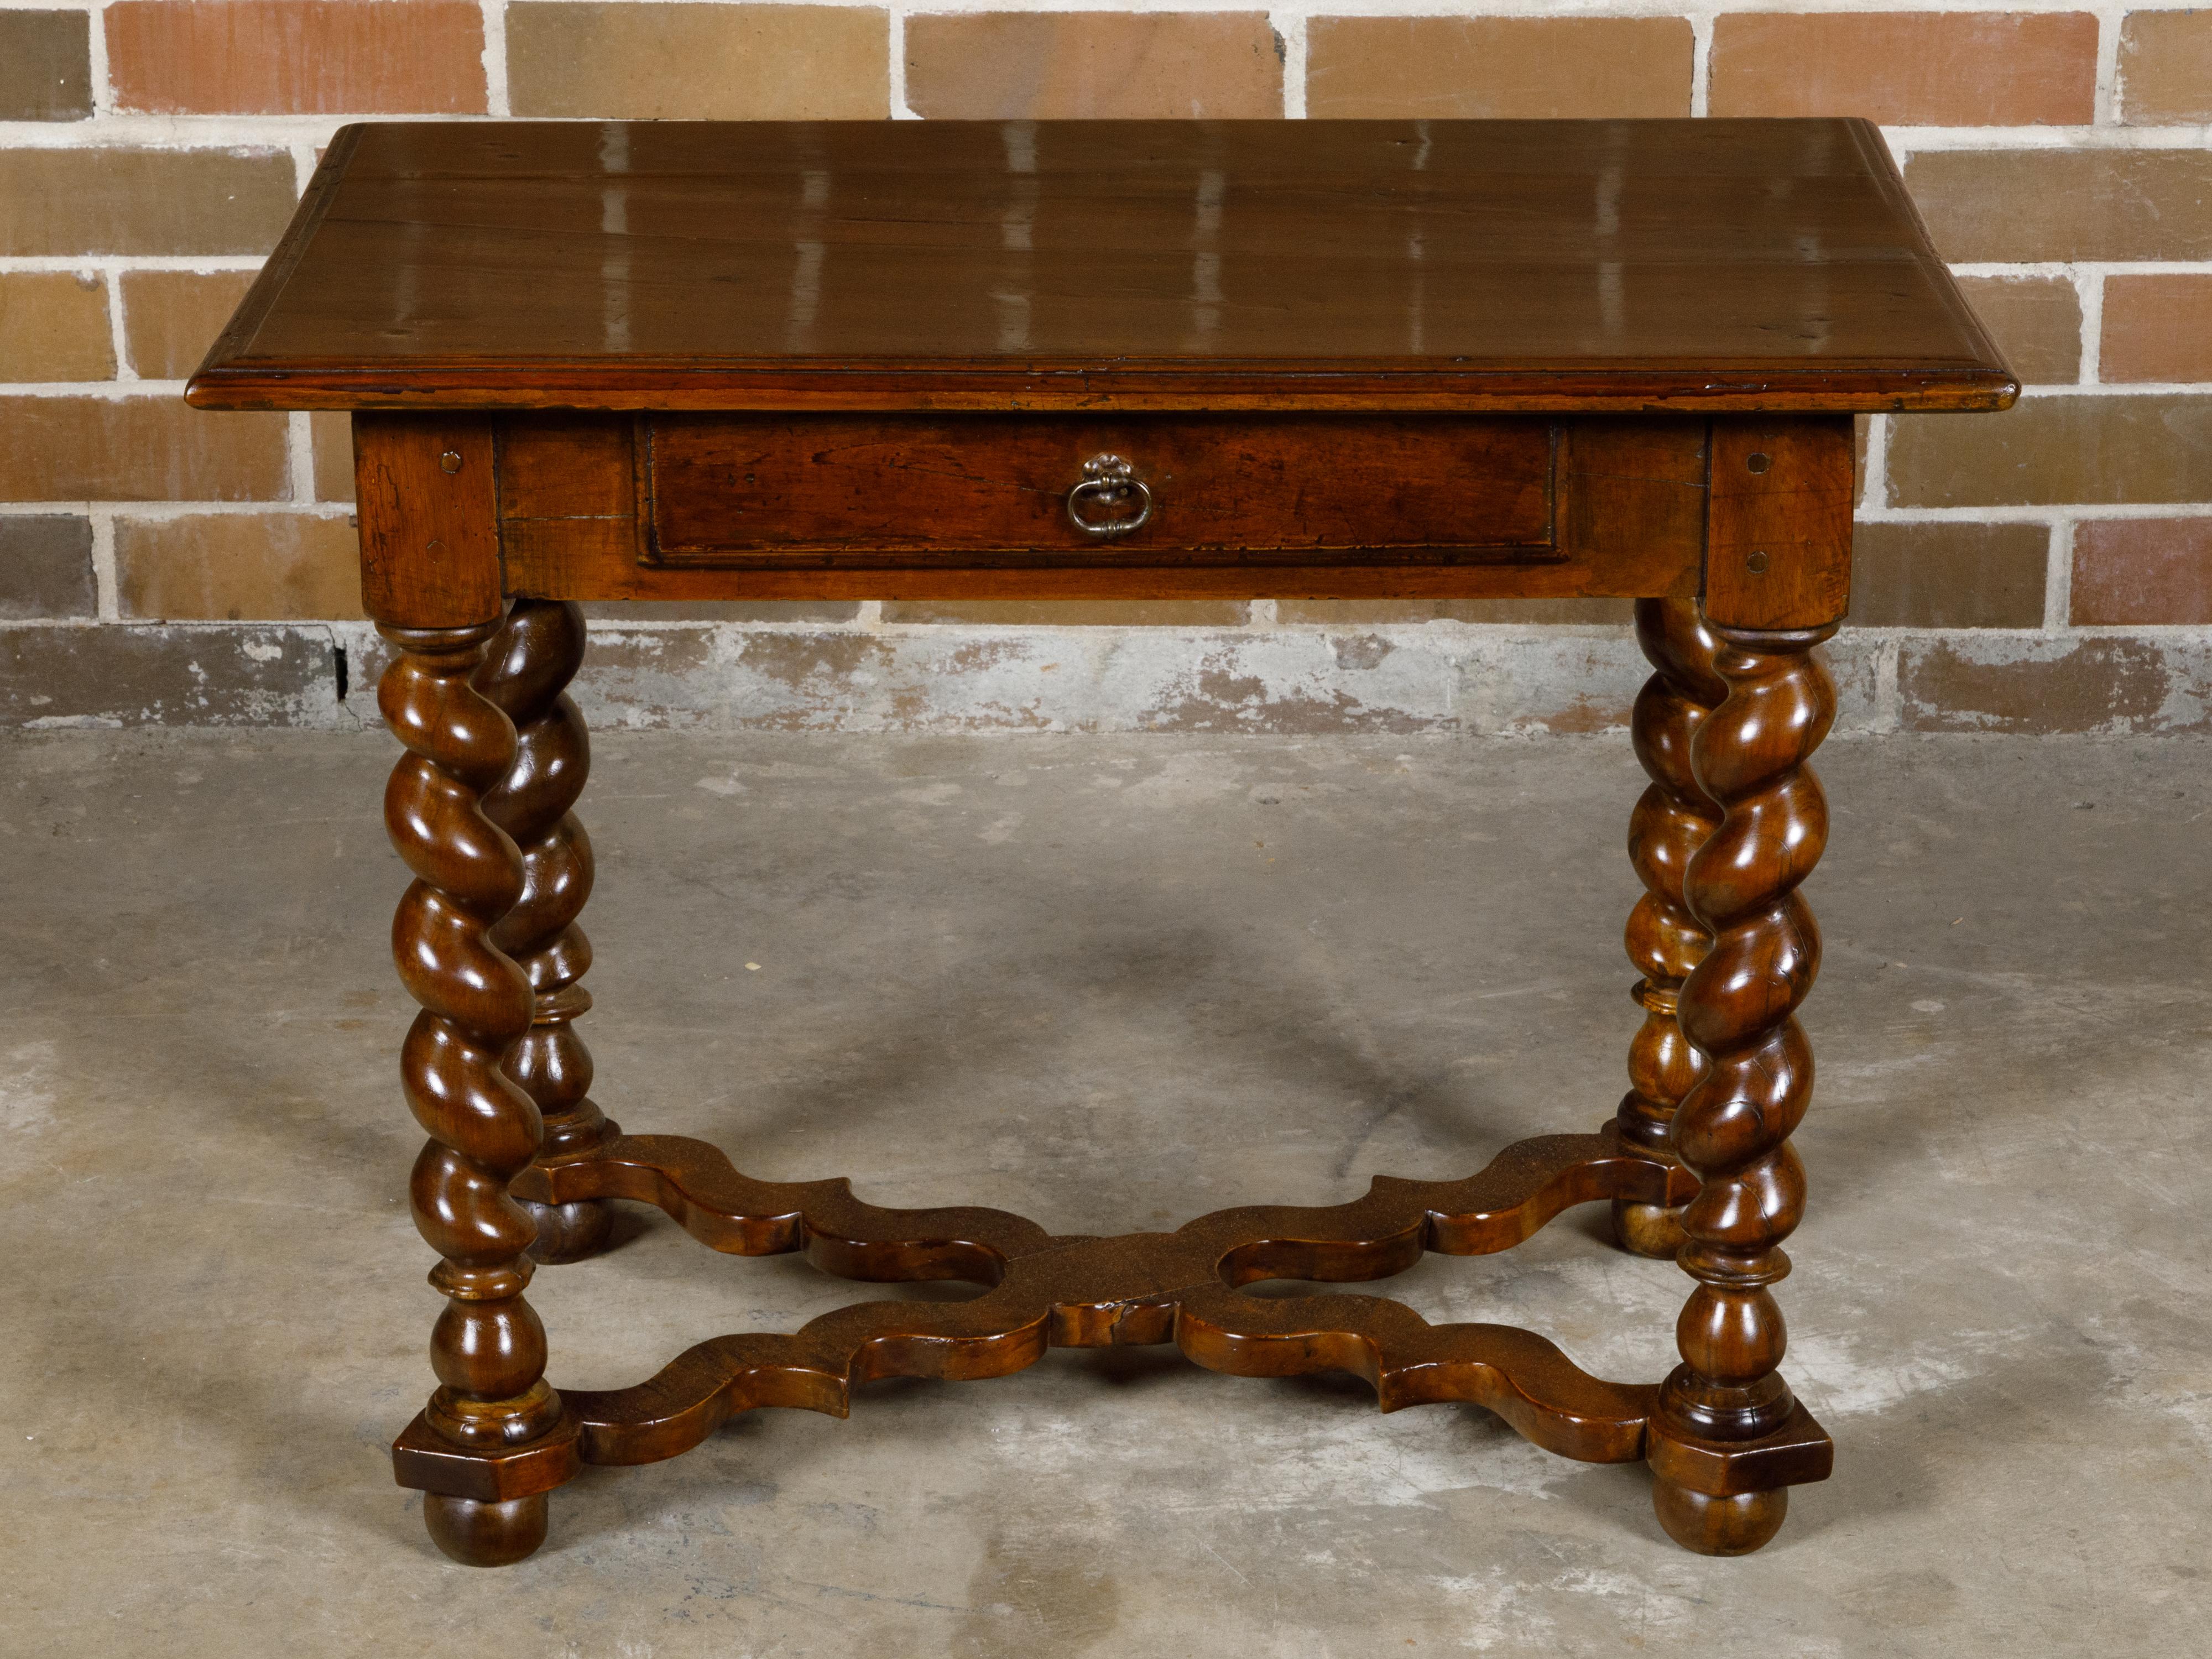 A French Louis XIII style walnut side table from the 19th century with barley twist base, carved X-Form cross stretcher and single drawer. This exquisite French Louis XIII style walnut side table, dating back to the 19th century, marries timeless